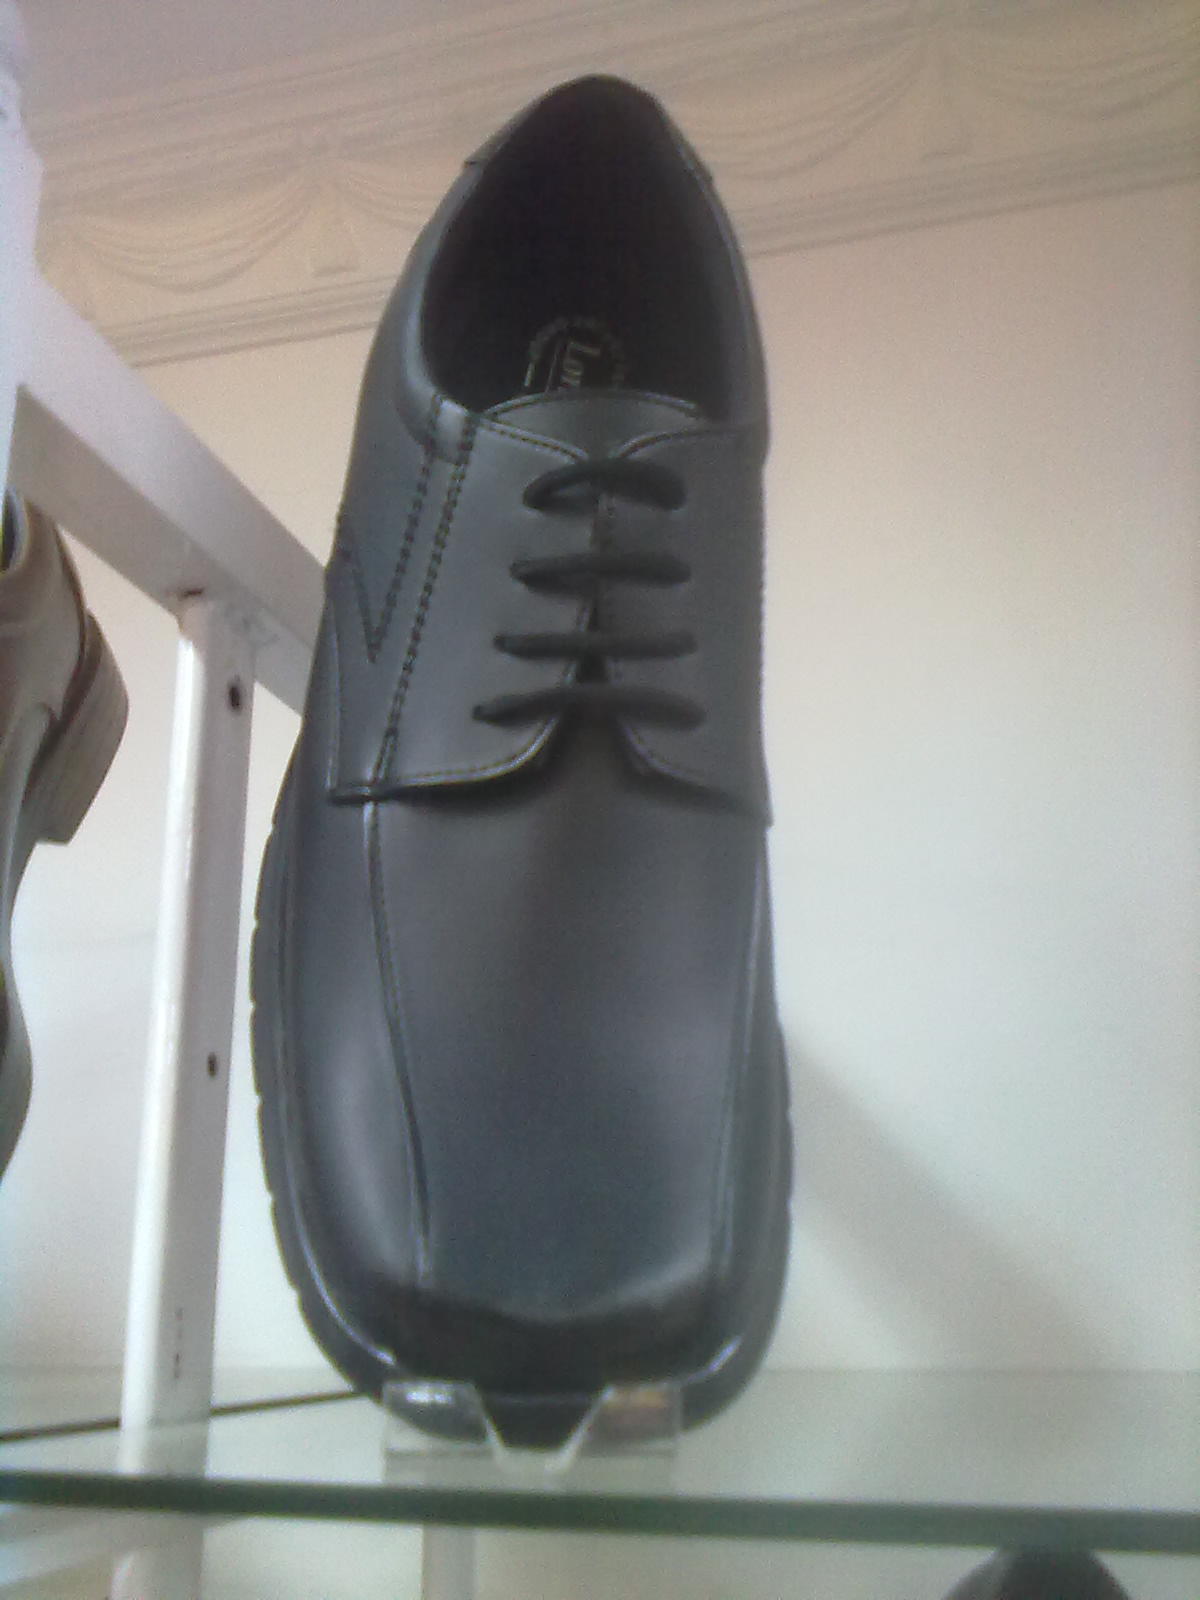 MANZA footwear and gift center: gents foot wear